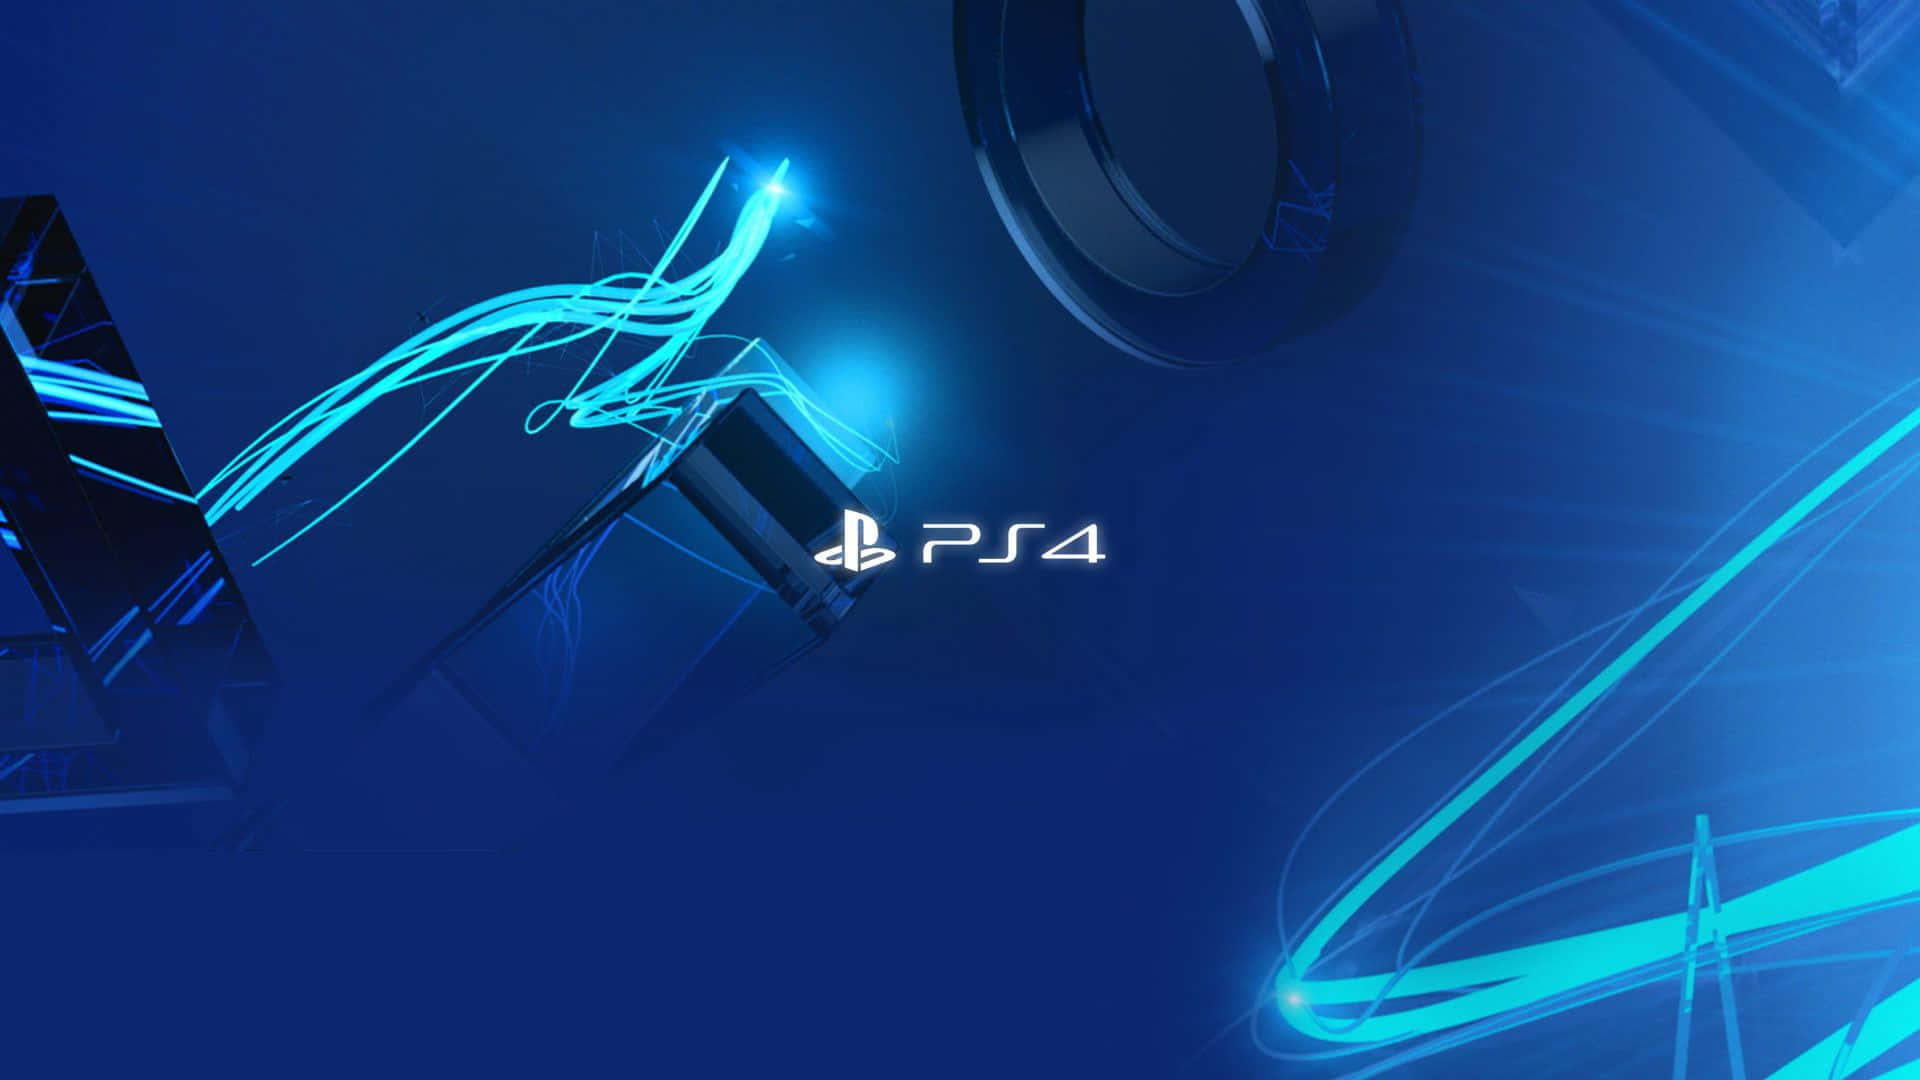 Default Cool Ps4 With Large Controller Icons Floating Wallpaper